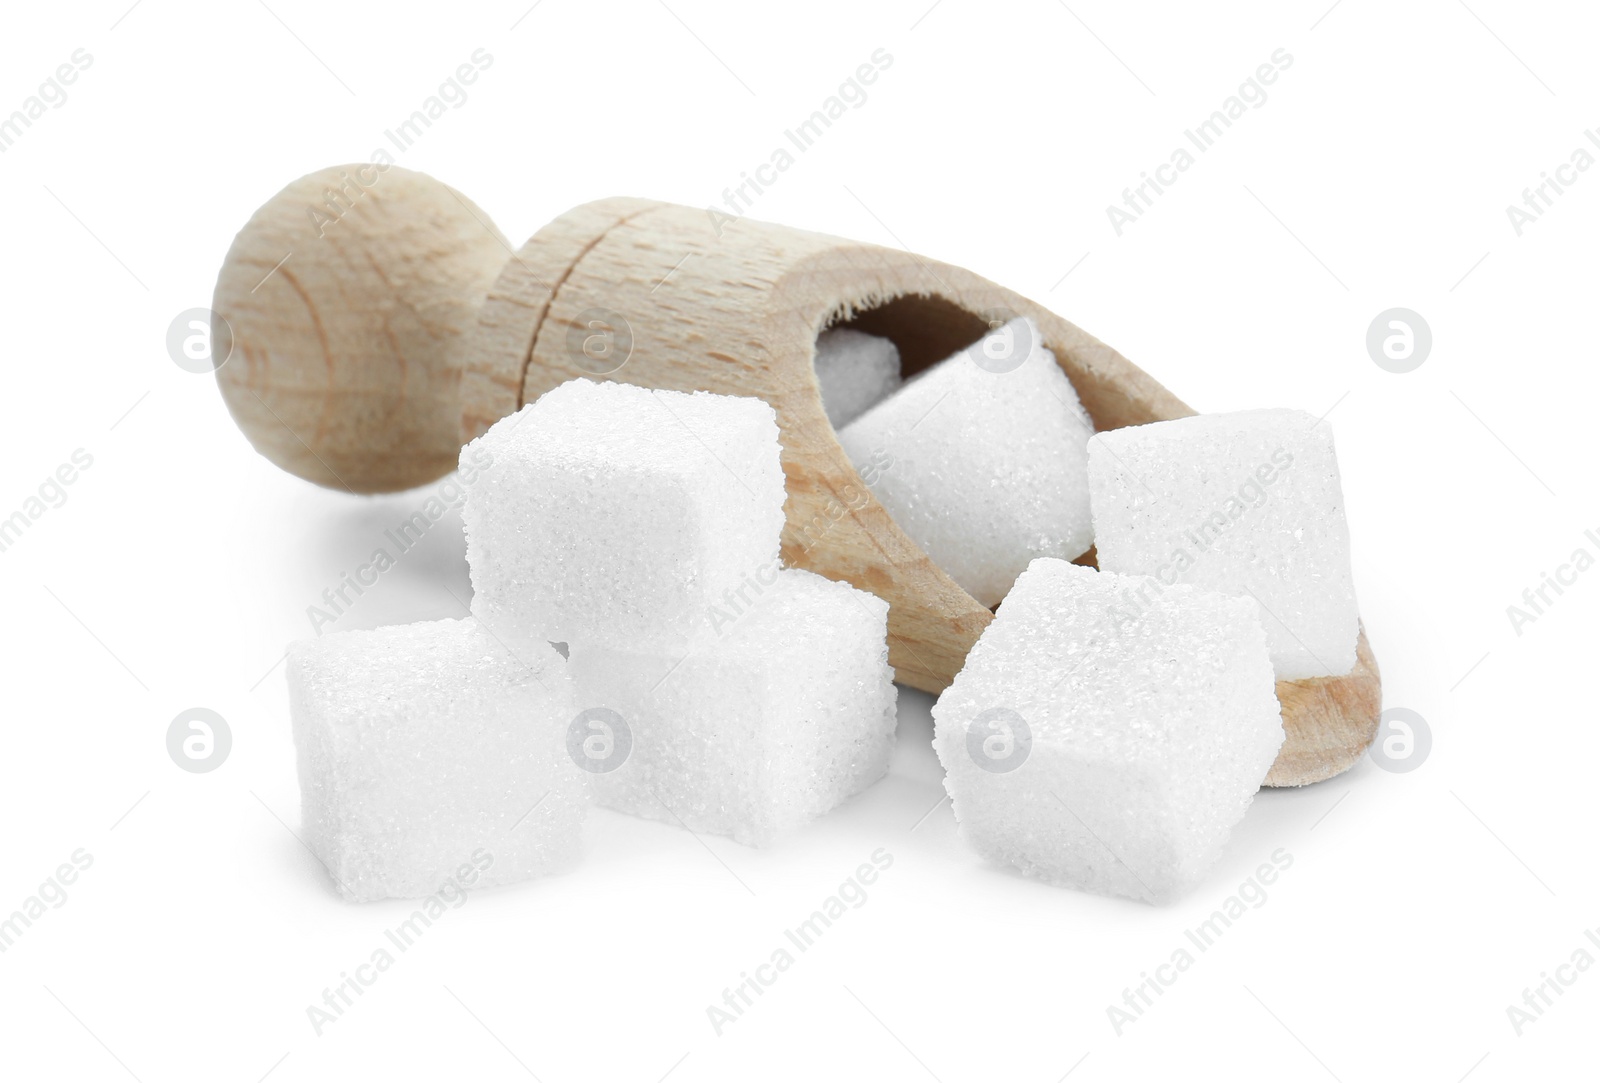 Photo of Sugar cubes and wooden scoop isolated on white